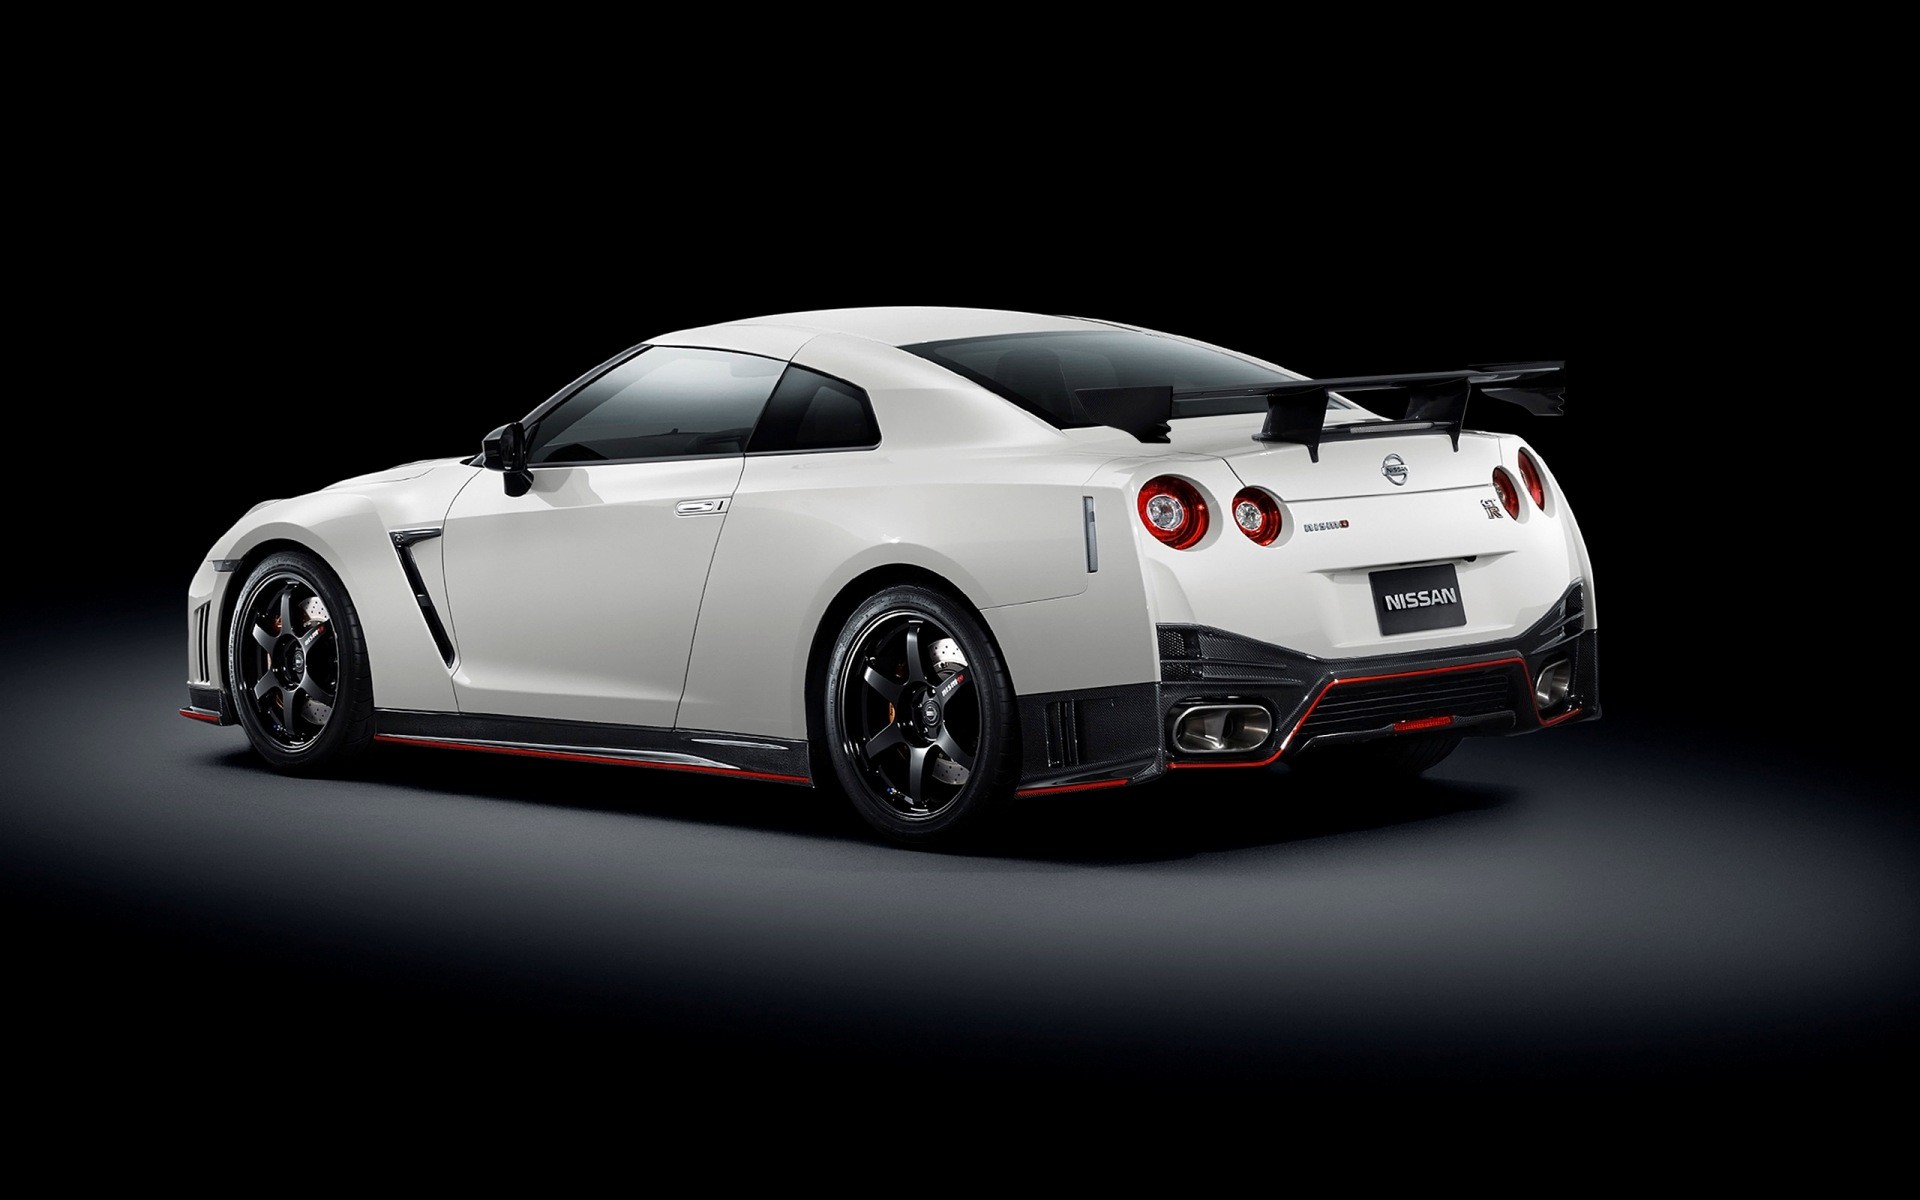 General 1920x1200 Nismo Nissan GT-R car black background white cars vehicle Japanese cars rear view simple background Nissan licence plates taillights